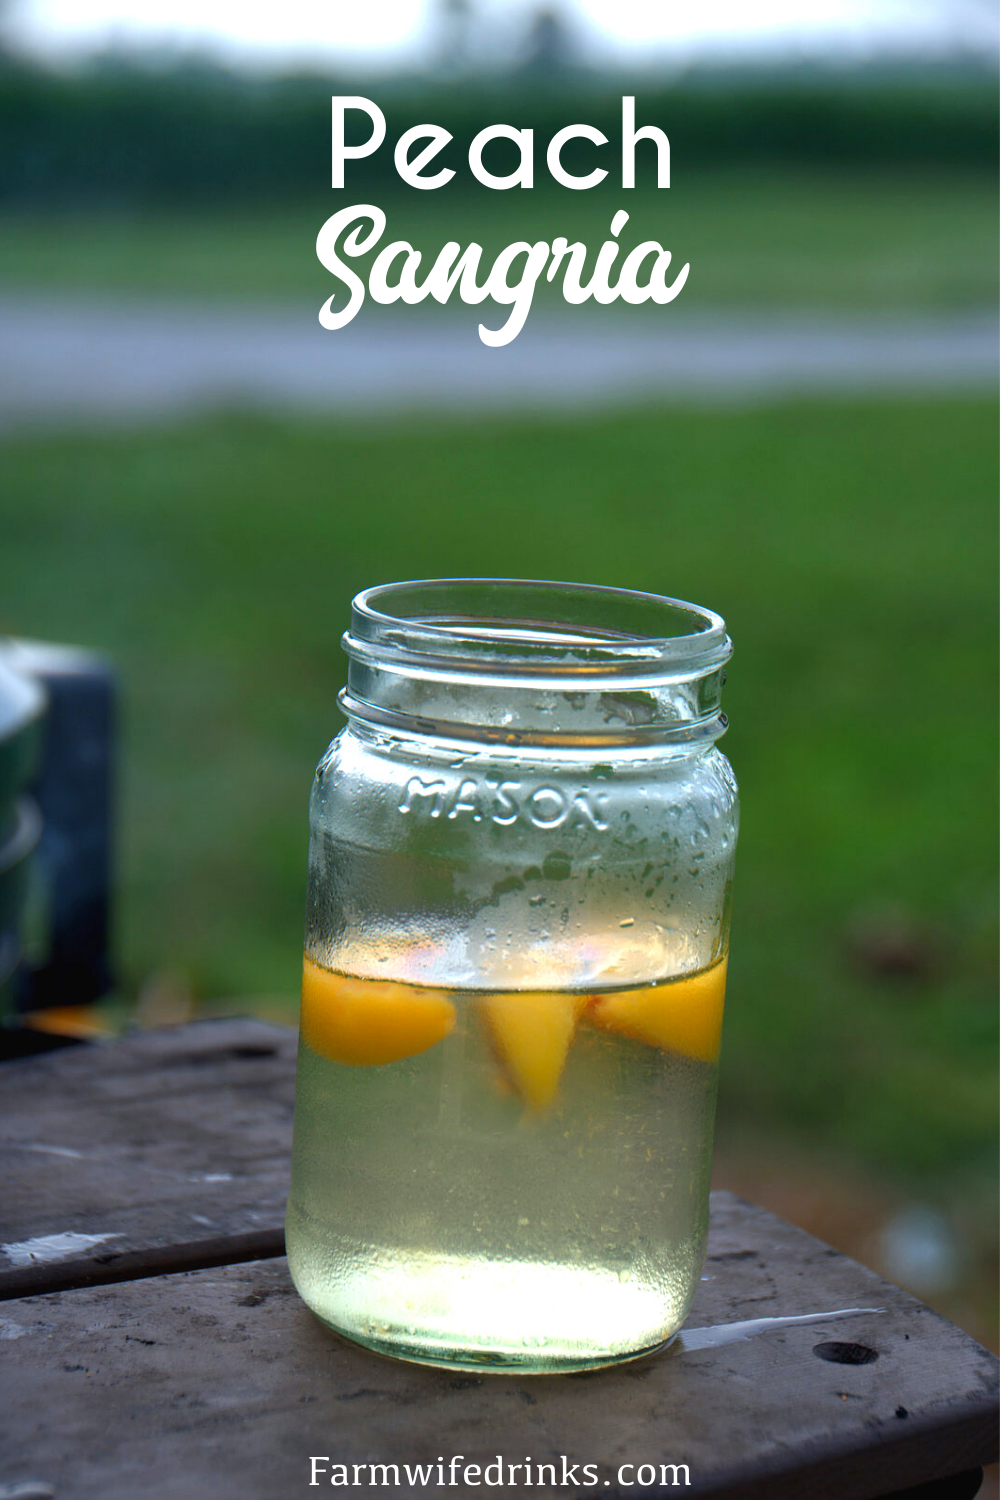 Peach Sangria is a crisp white wine sangria made with frozen peaches, peach schnapps, and vodka mixed with a bottle of white wine.